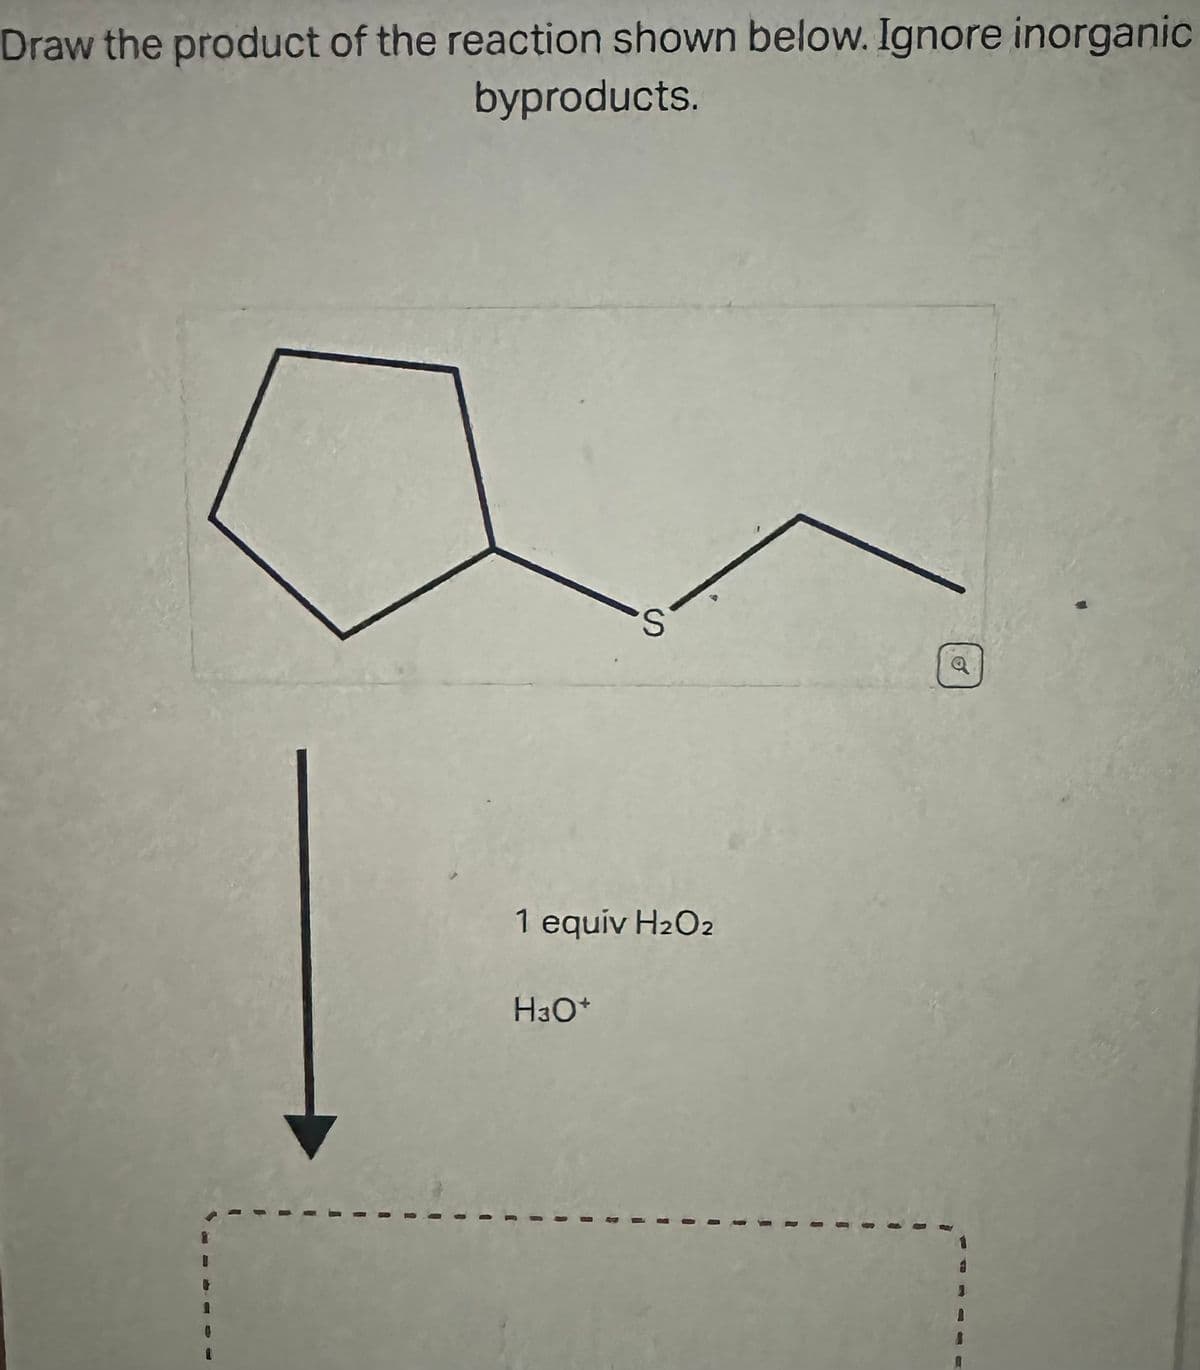 Draw the product of the reaction shown below. Ignore inorganic
byproducts.
'S
1 equiv H₂O2
H3O+
Q